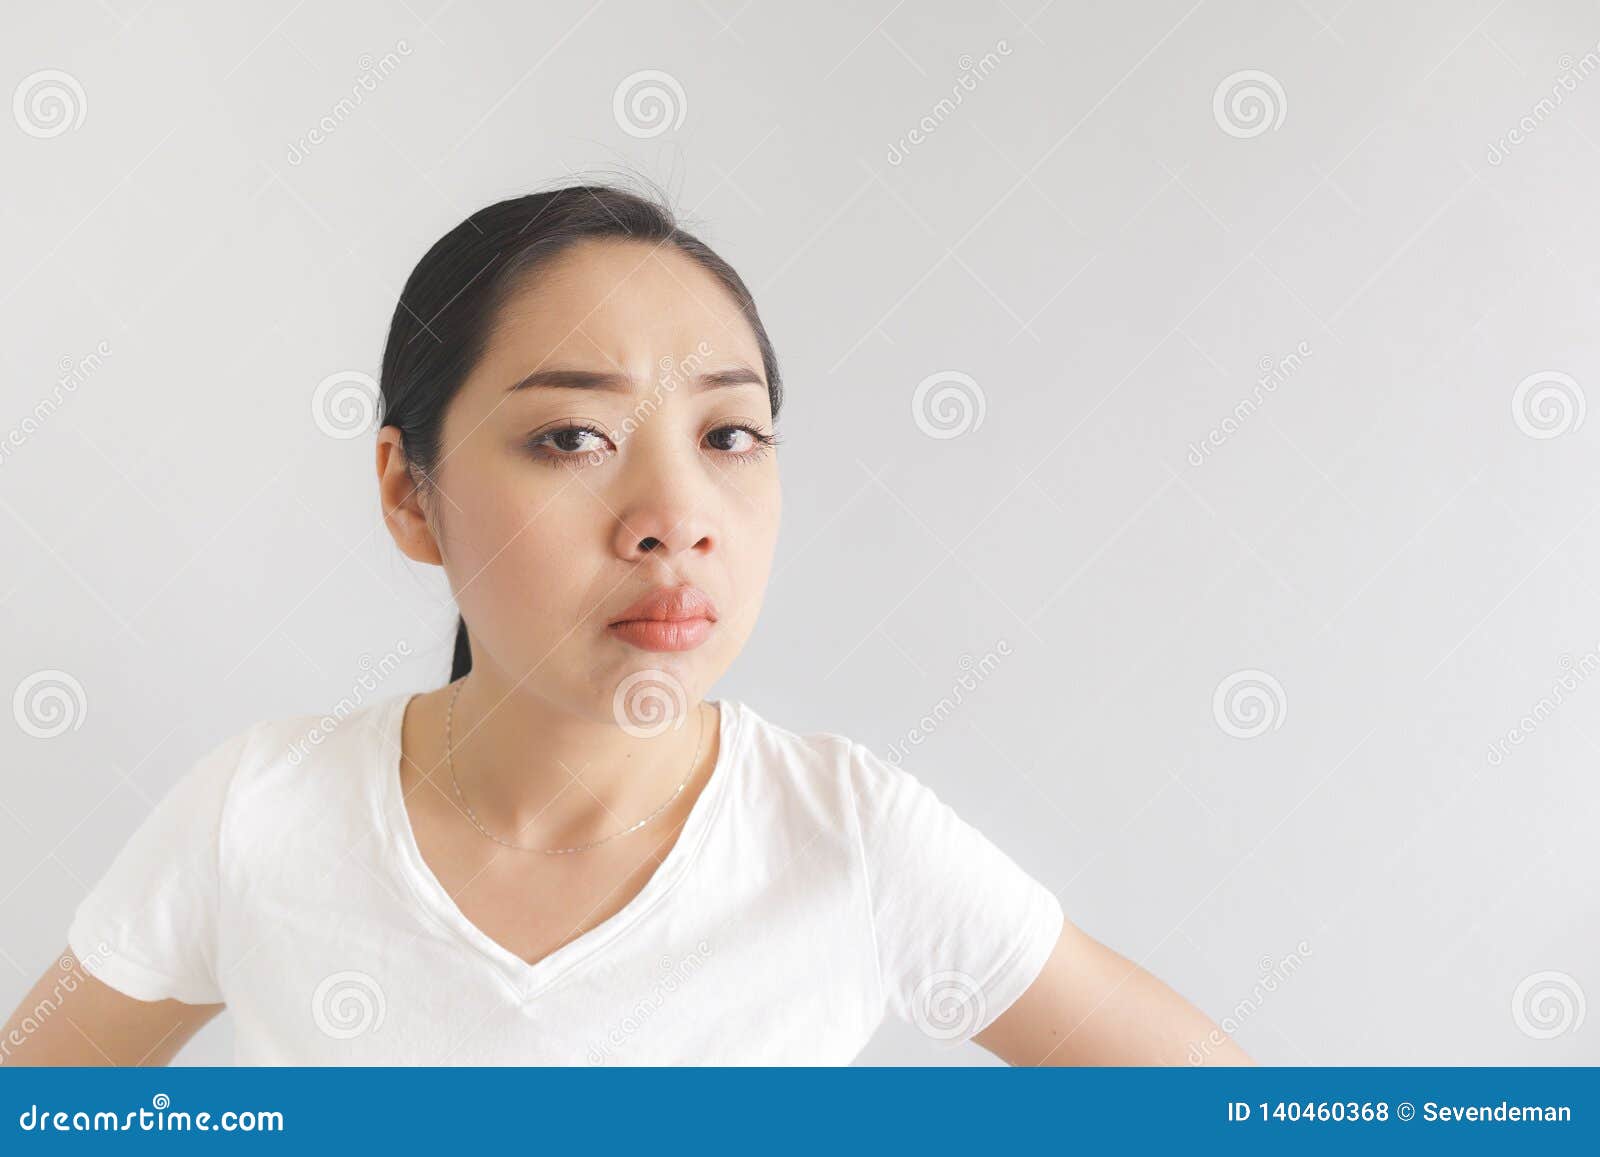 sulk and grumpy face expression of woman in white t-shirt. concept of offended peevish and sulky